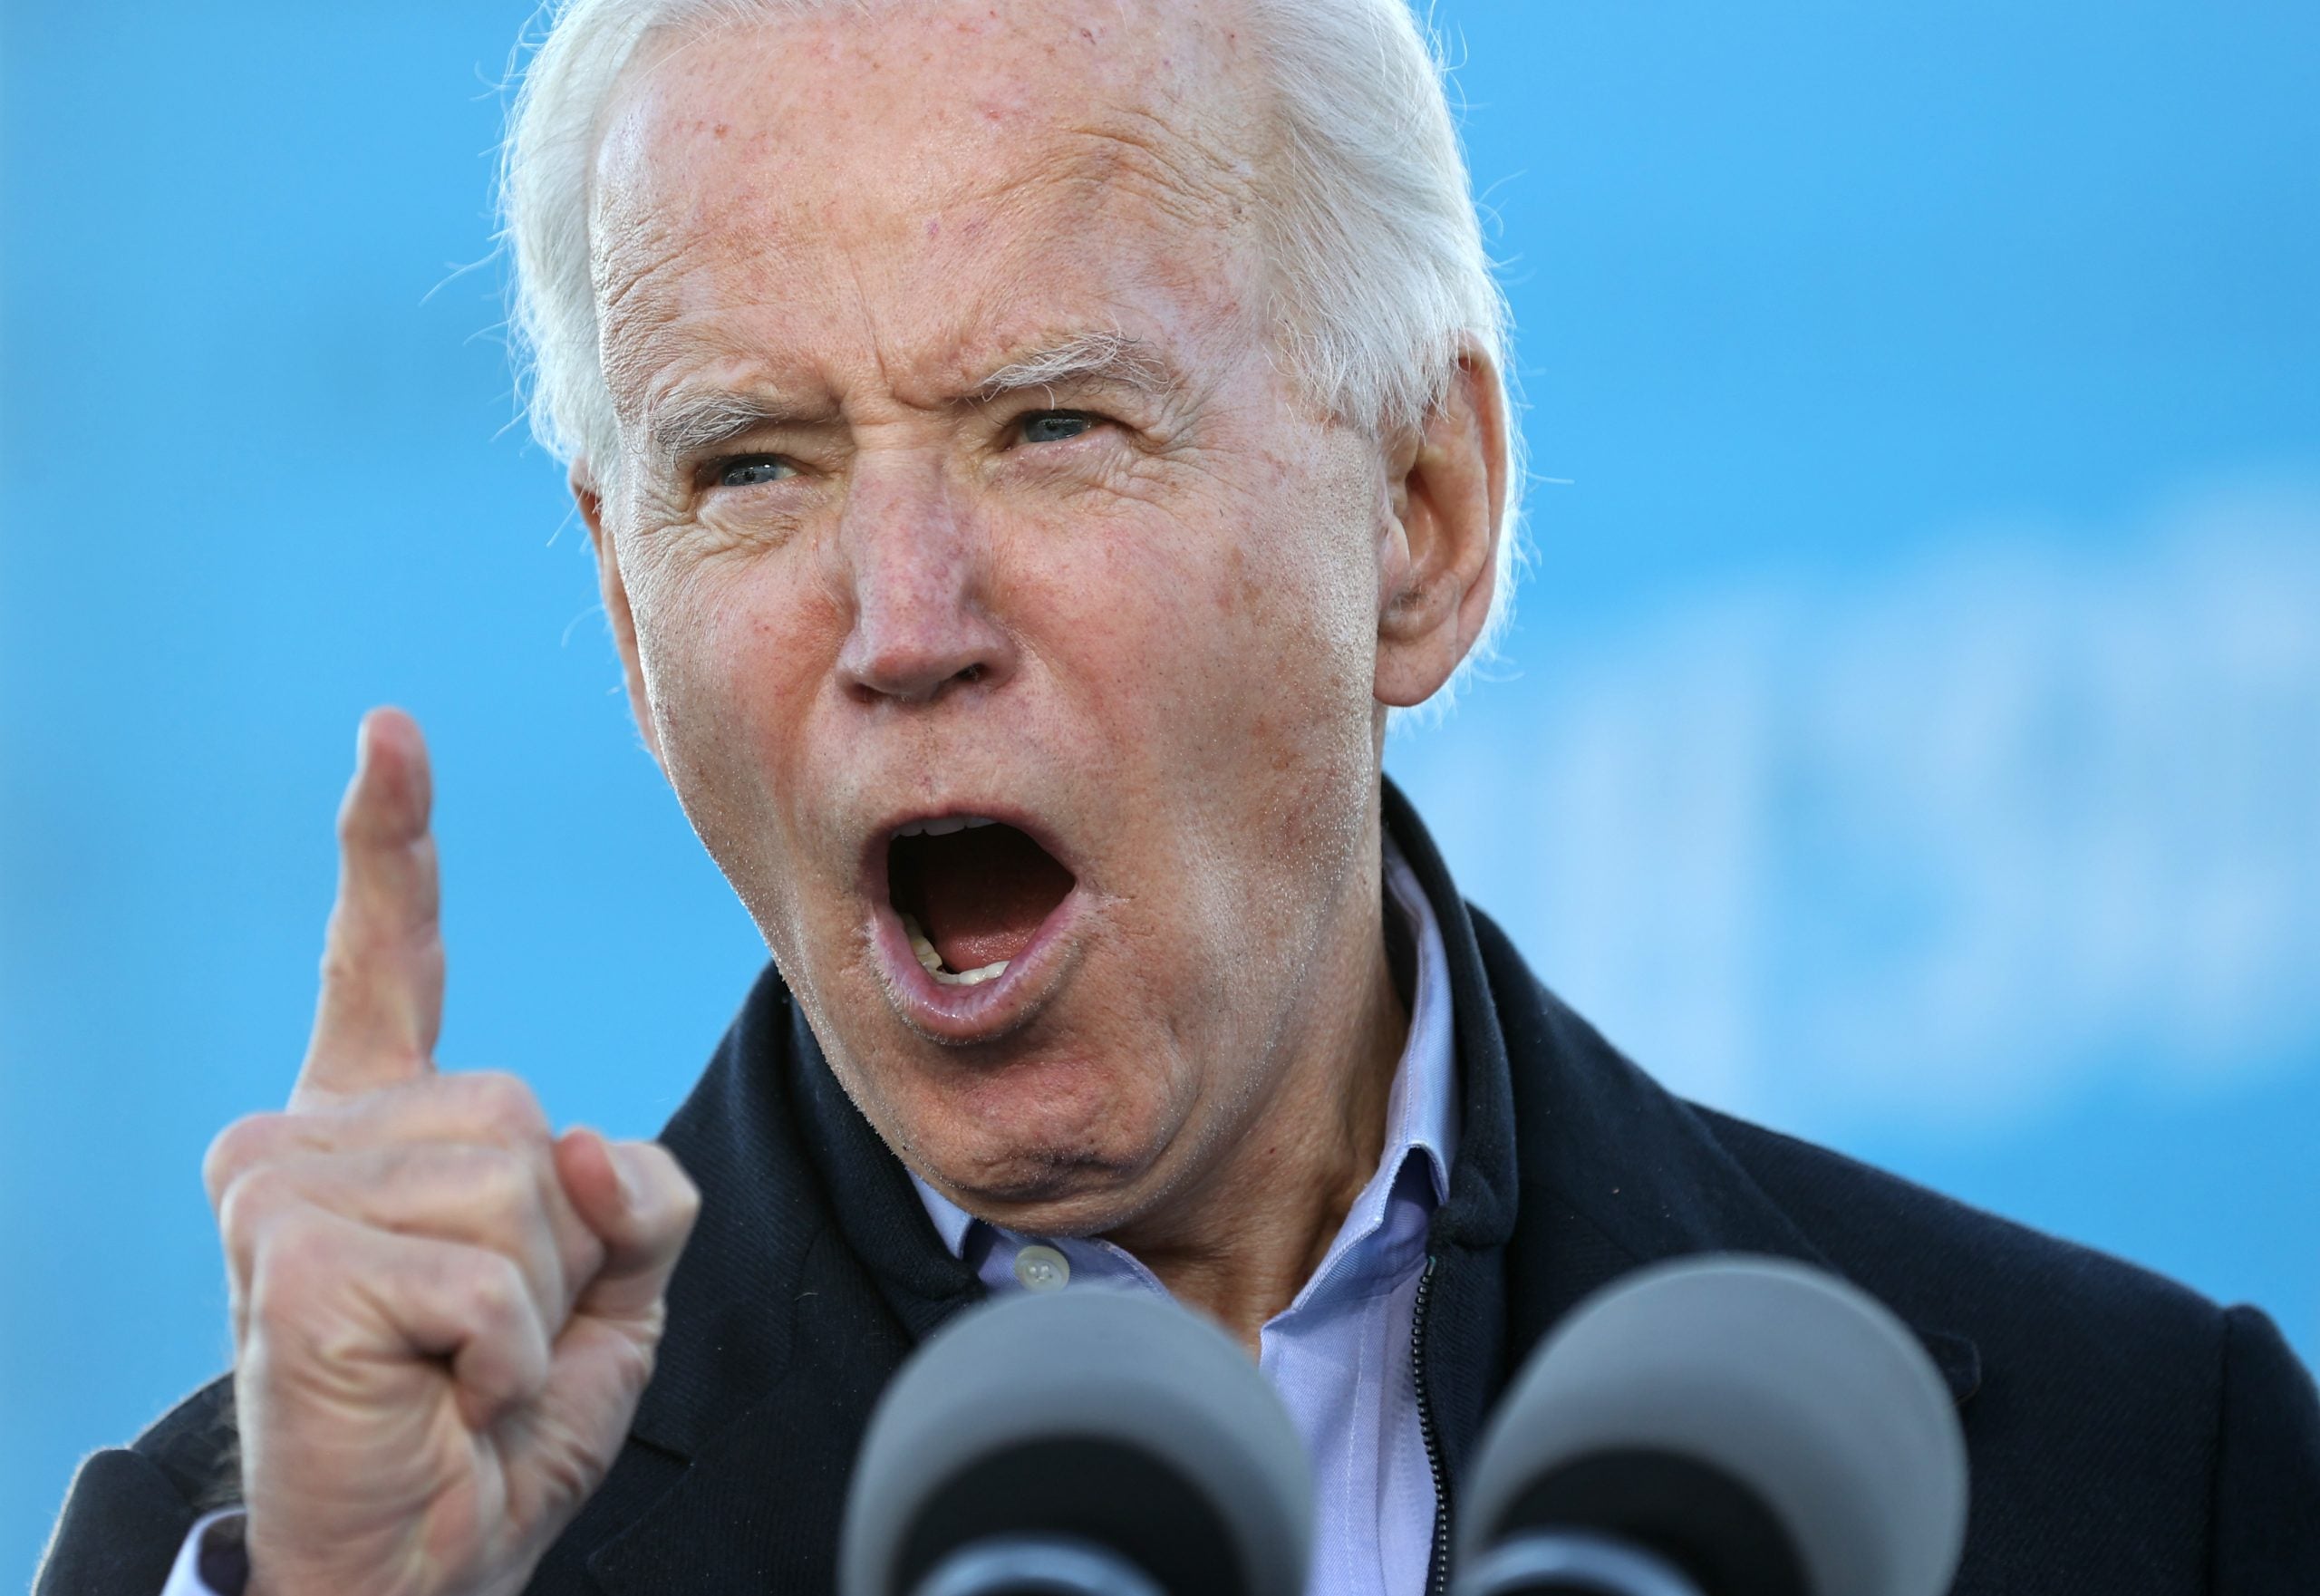 Joe Biden’s “Made in America“ rhetoric is about to meet the ongoing reality of globalisation